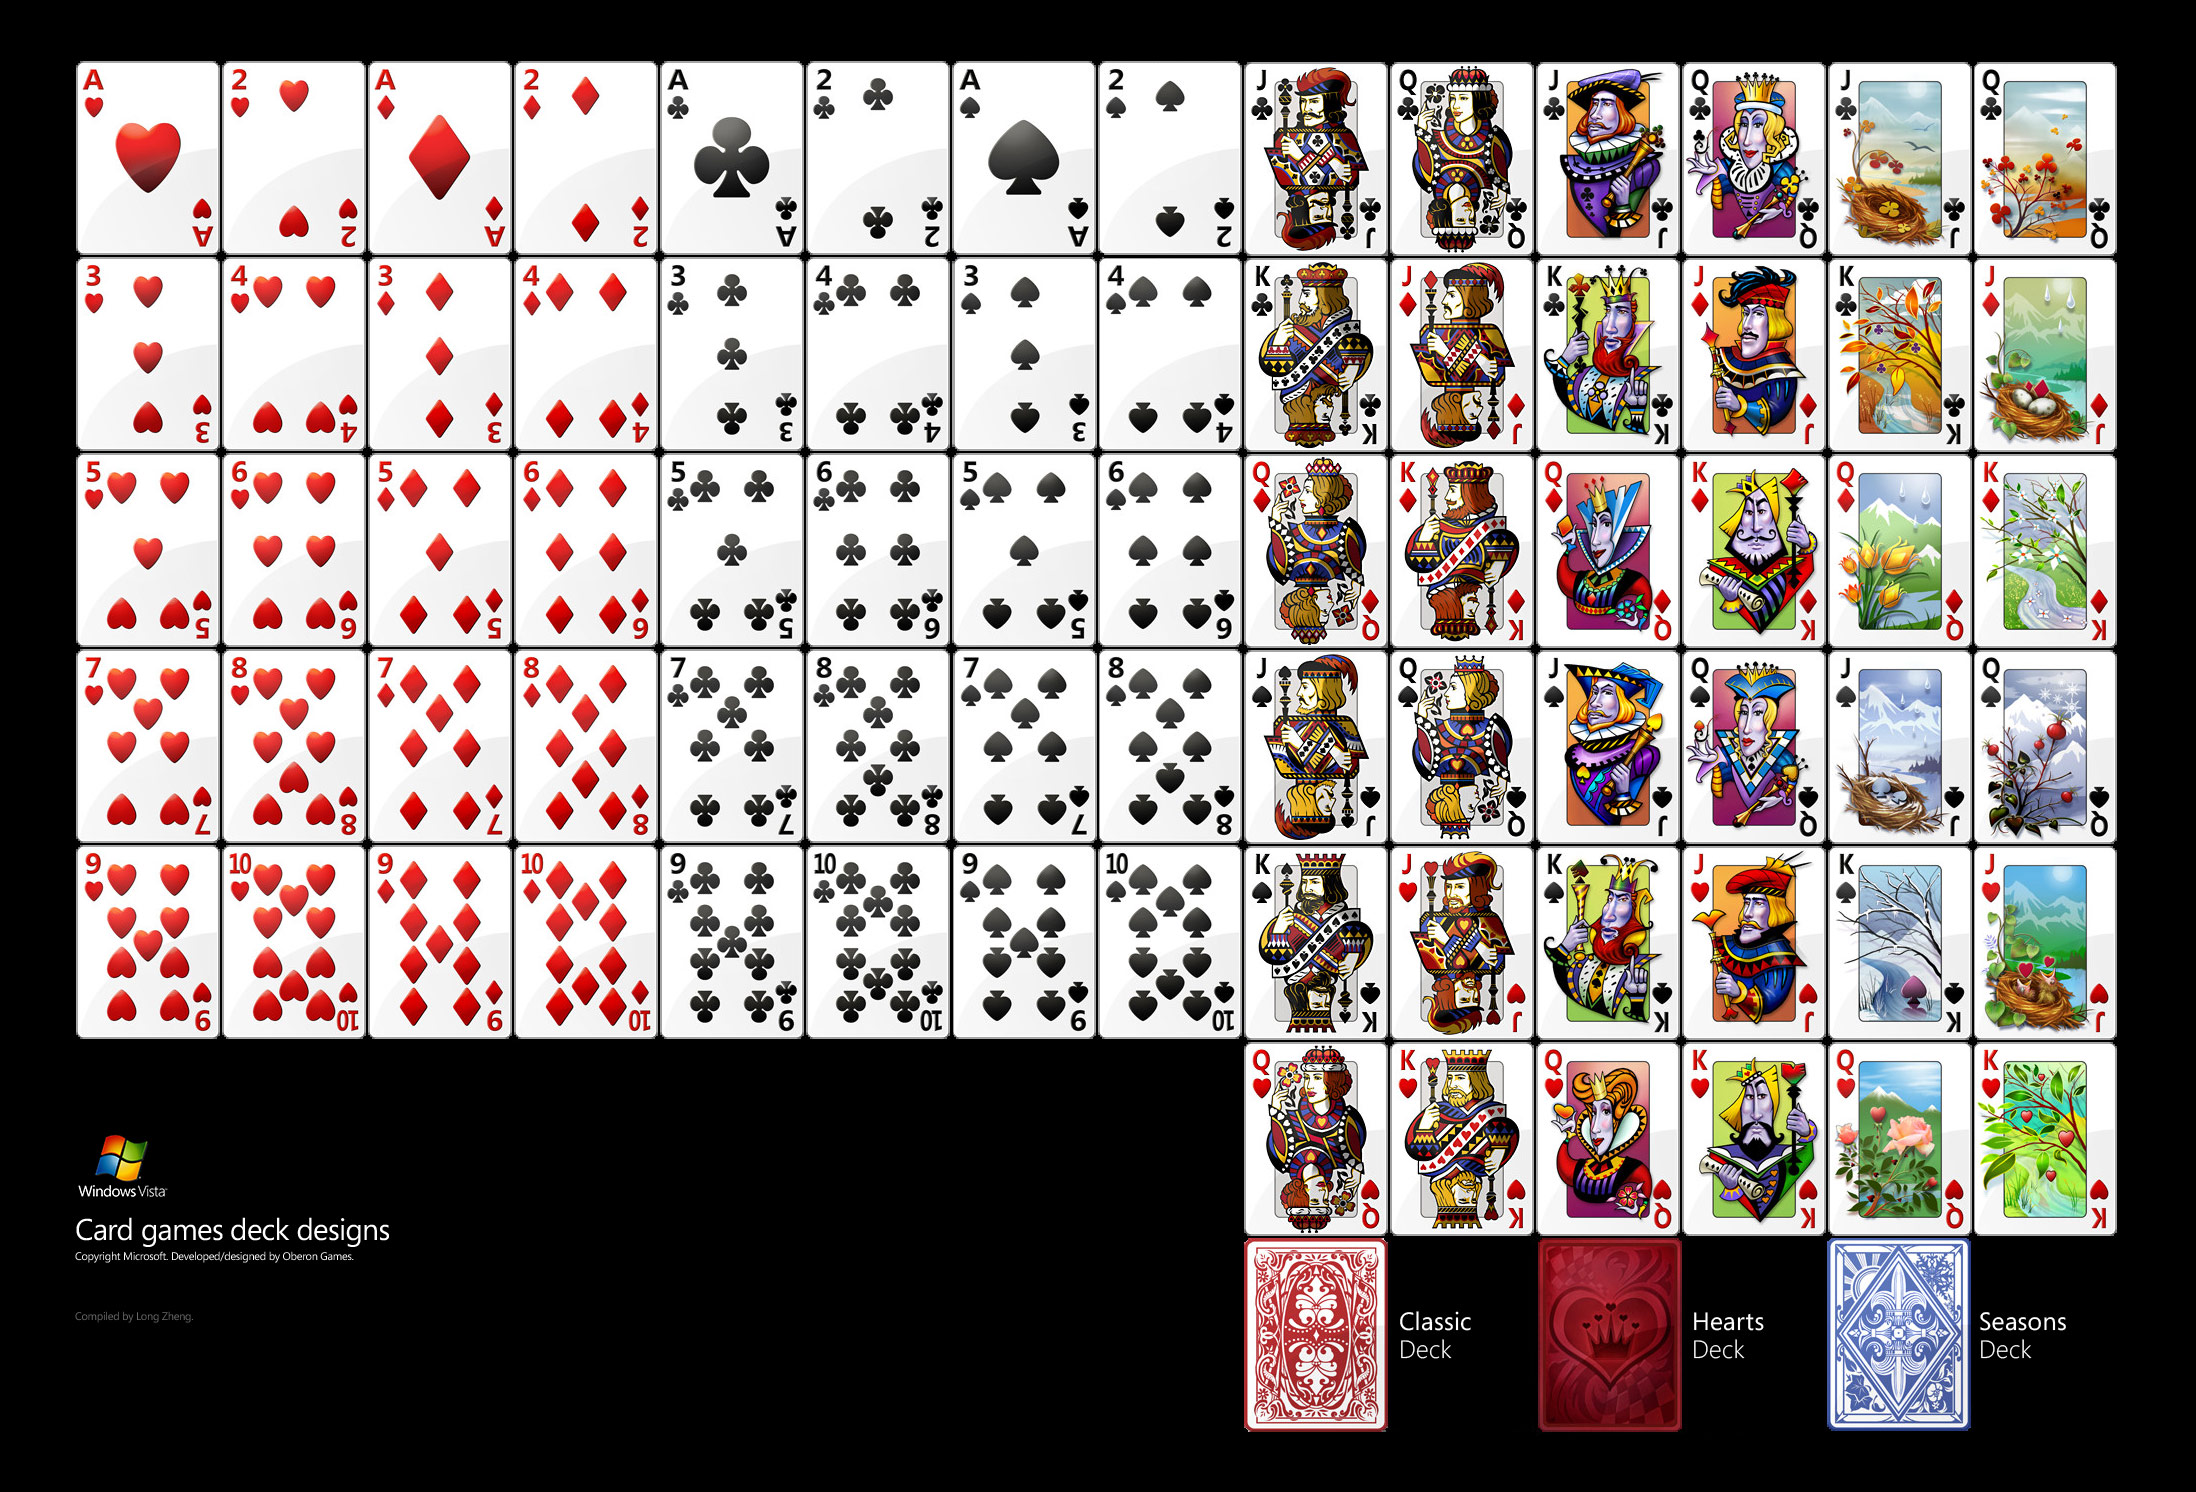 MSN Games - Microsoft FreeCell Solitaire